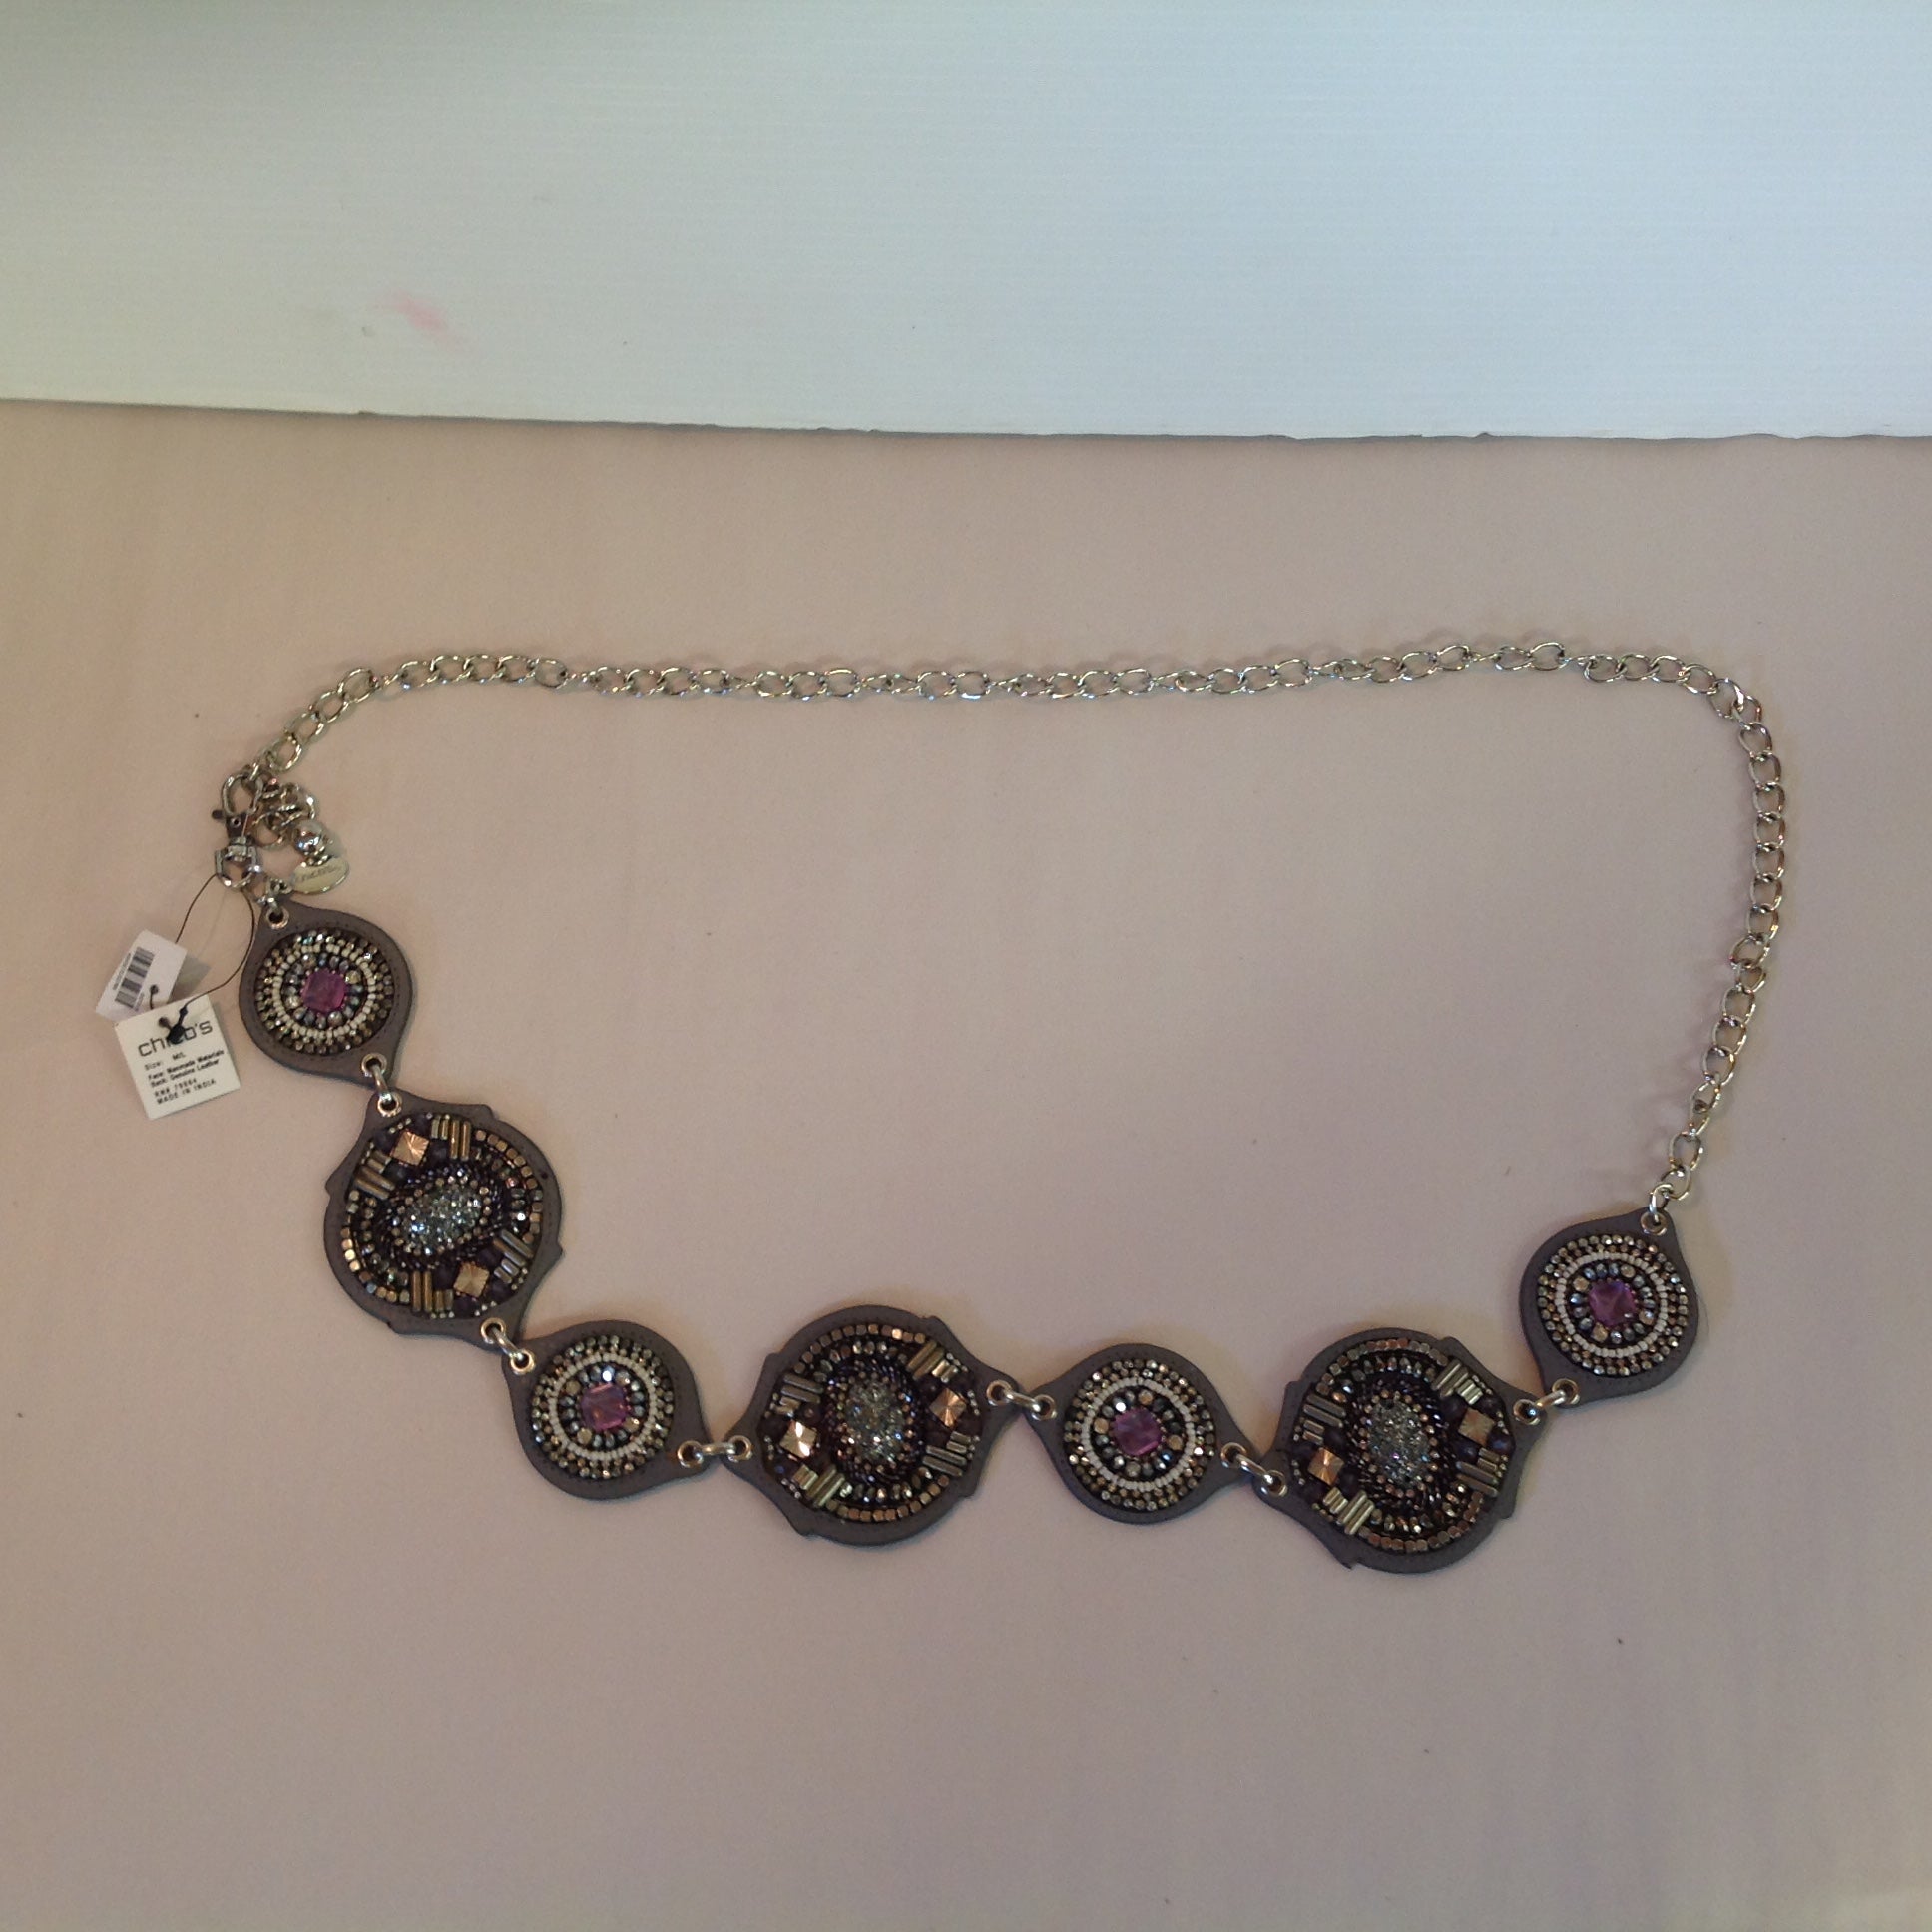 Chico's Women's M/L Grey Black Leather Medallion Violet White Rhinestone Beaded Chain Belt with Tags 23